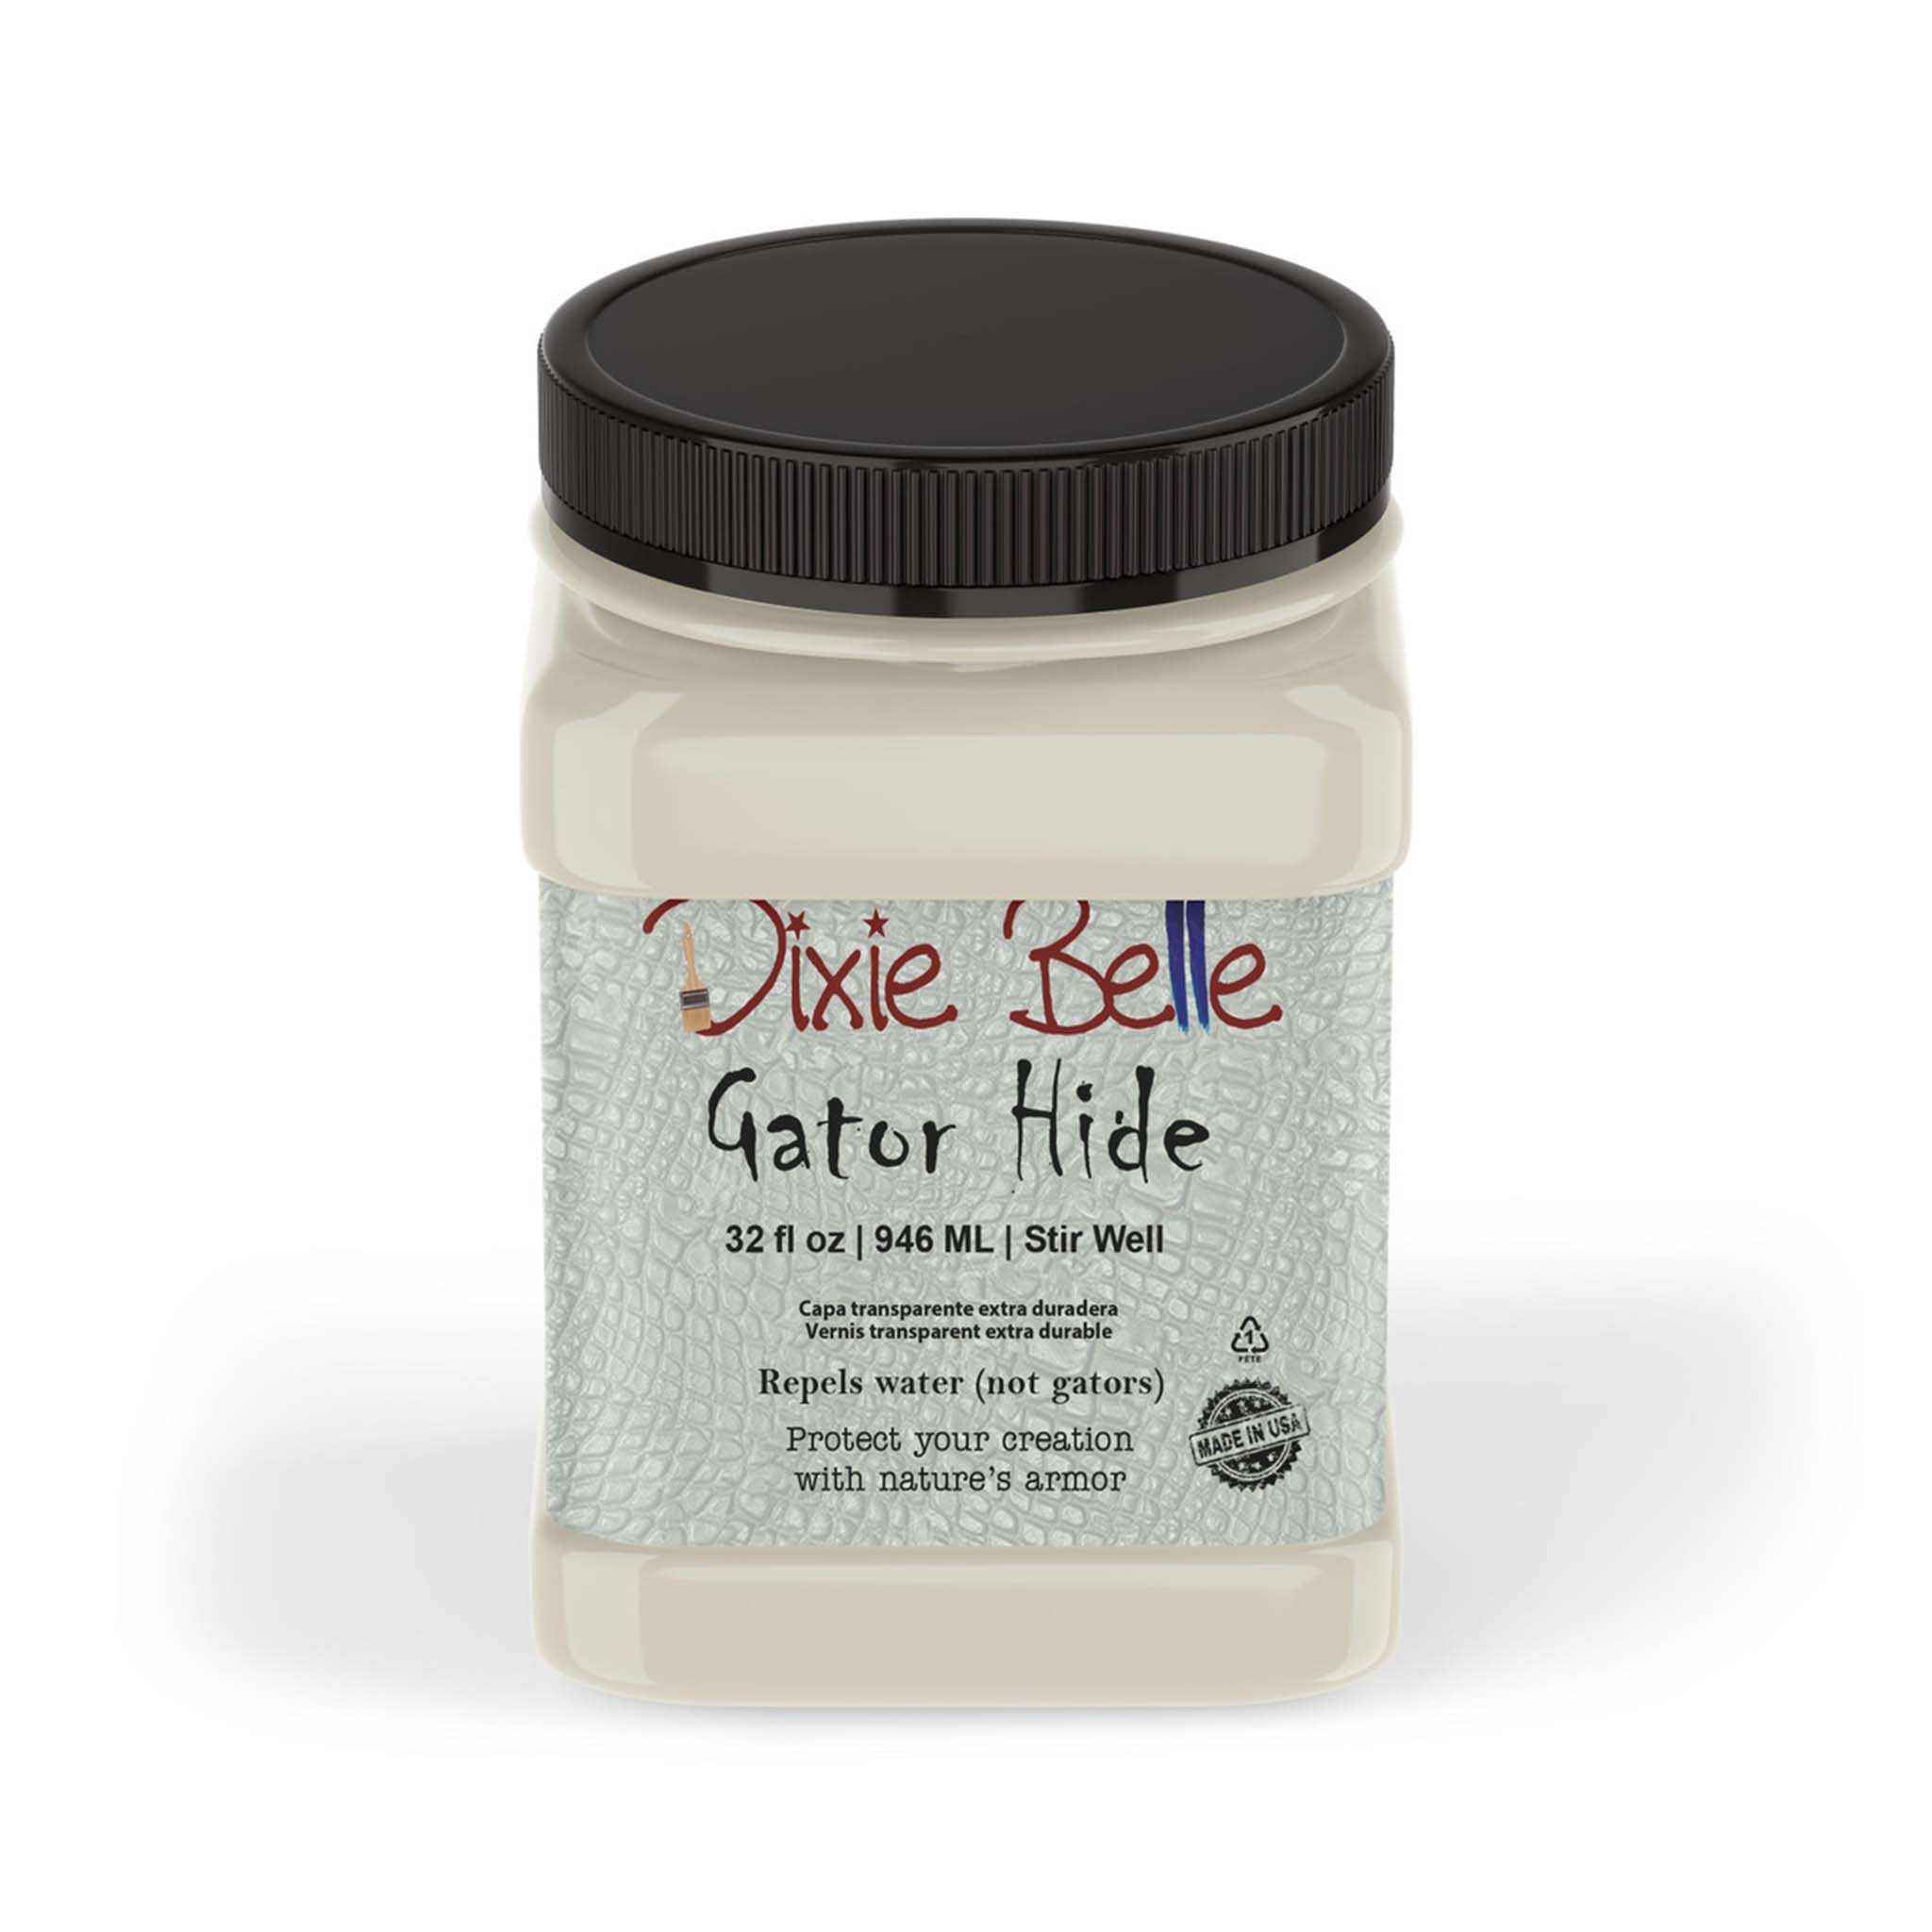 A 32oz container of Dixie Belle's Gator Hide is against a white background.